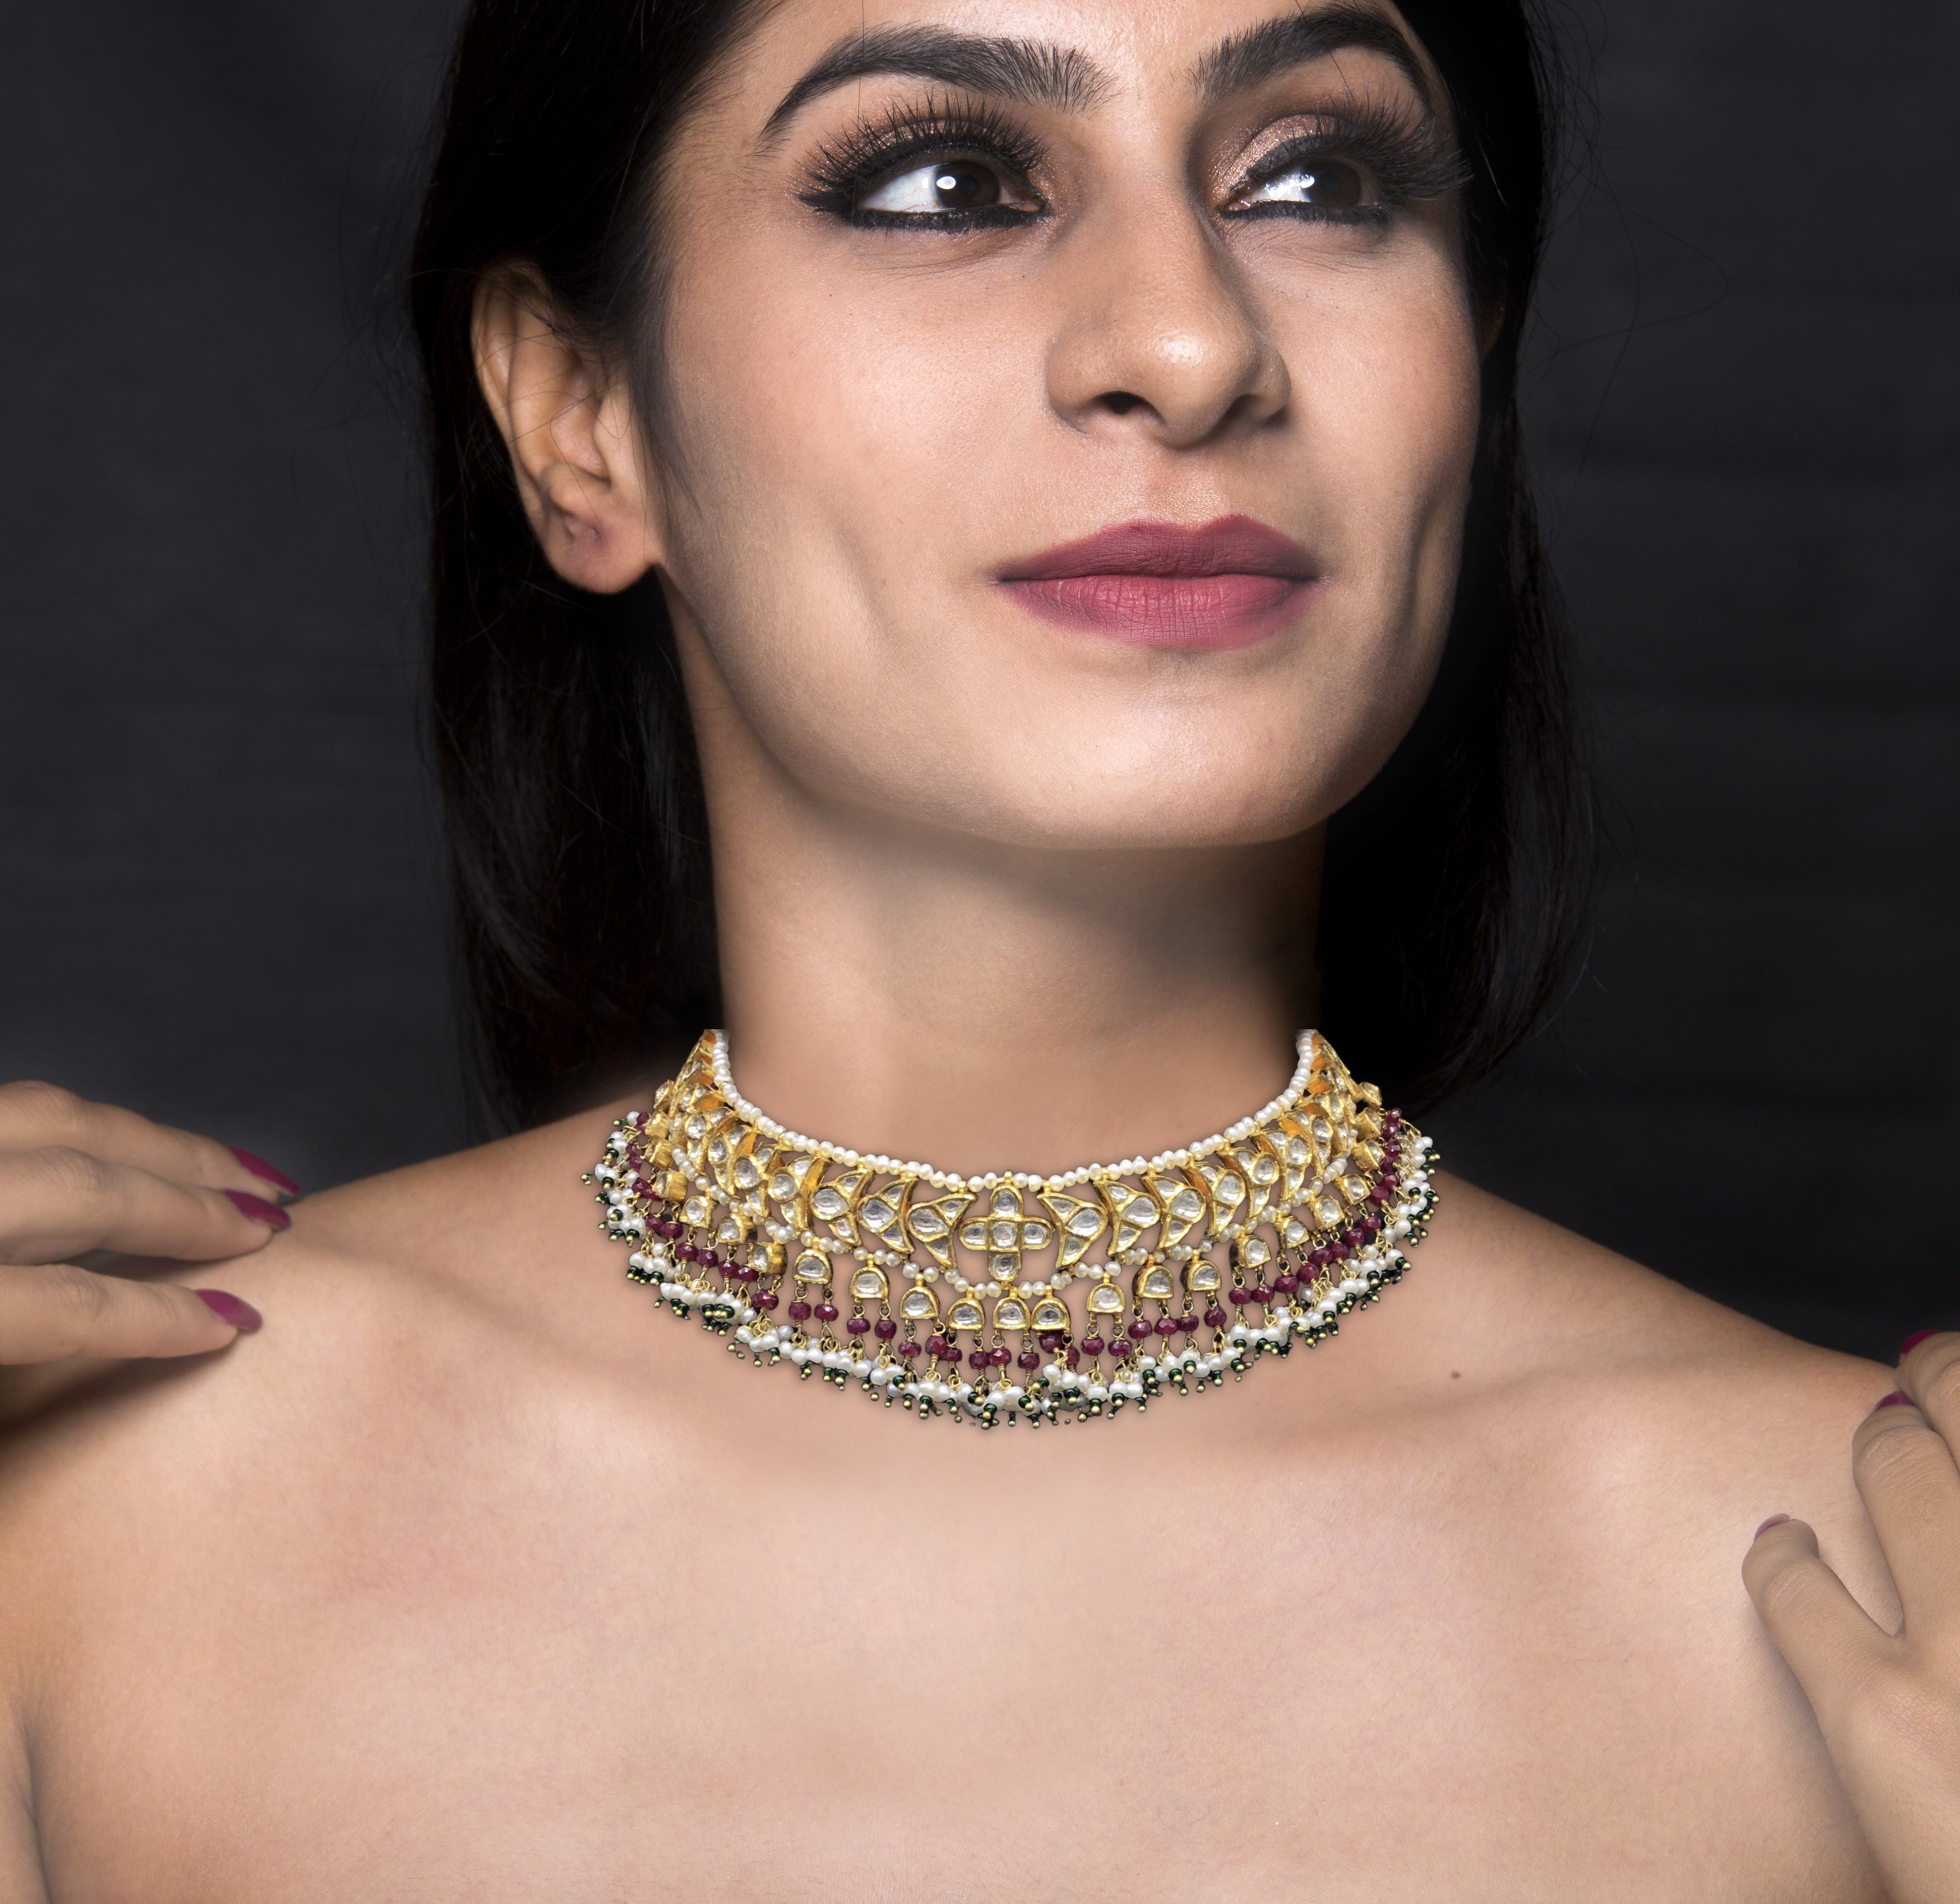 22k Gold and Diamond Polki Choker Necklace with Natural Freshwater Pearls